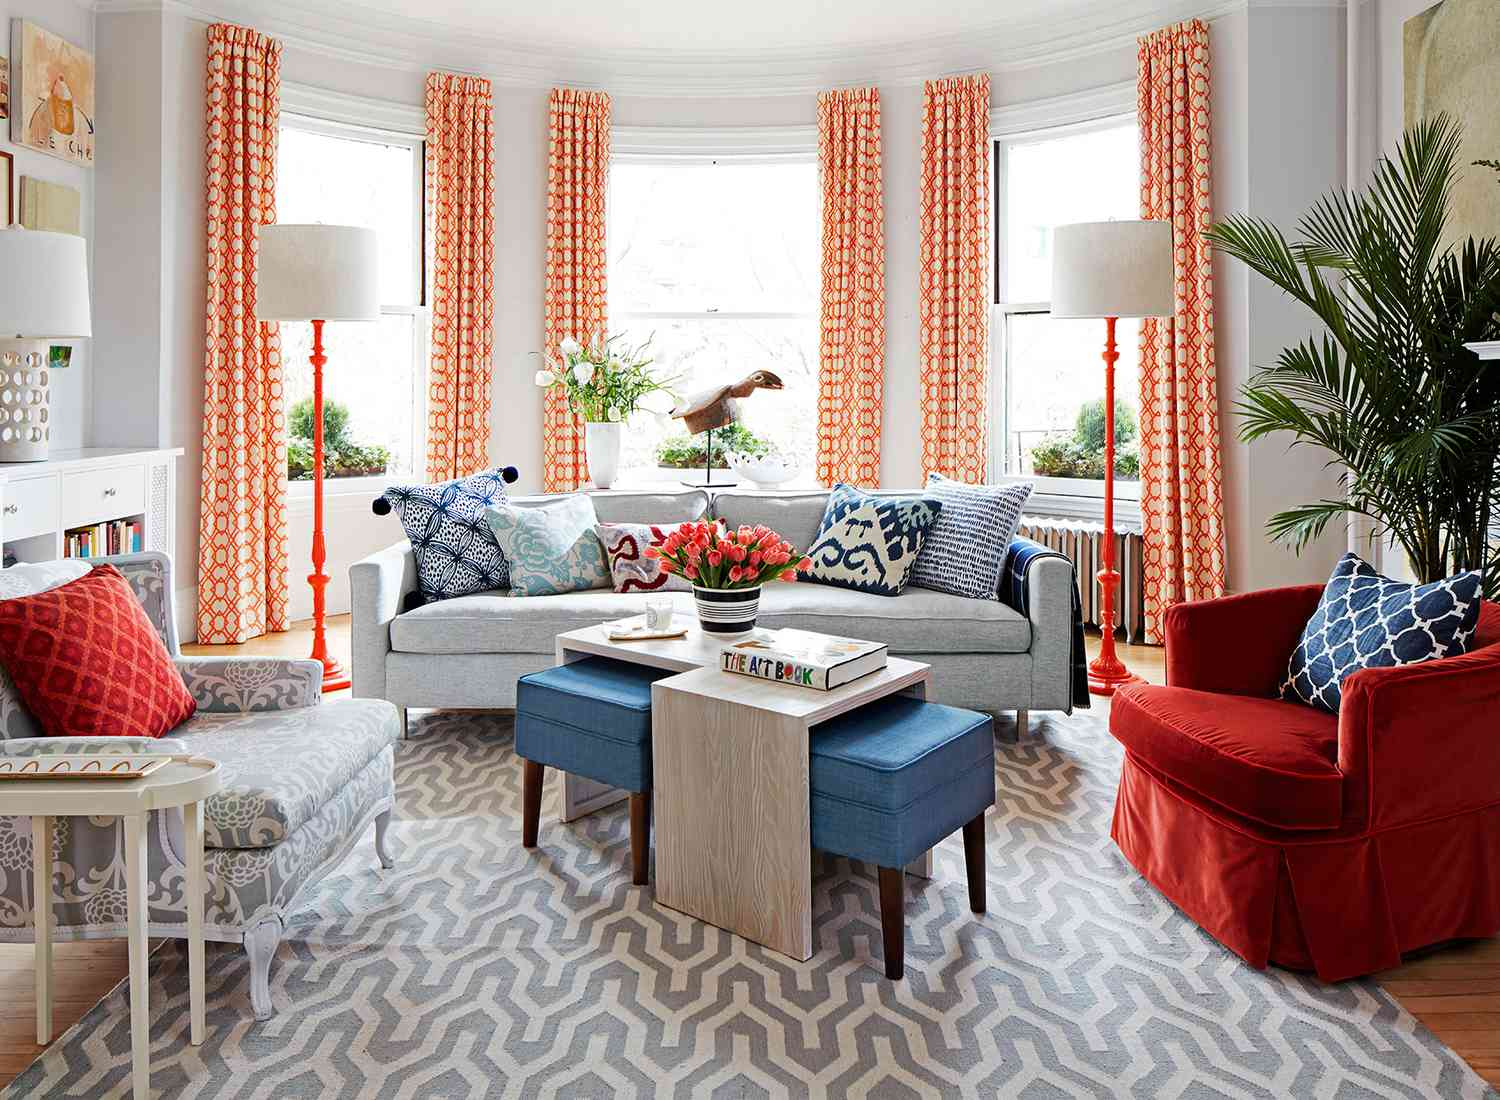 10 Tips for Creating a Spectacular Living Room Design